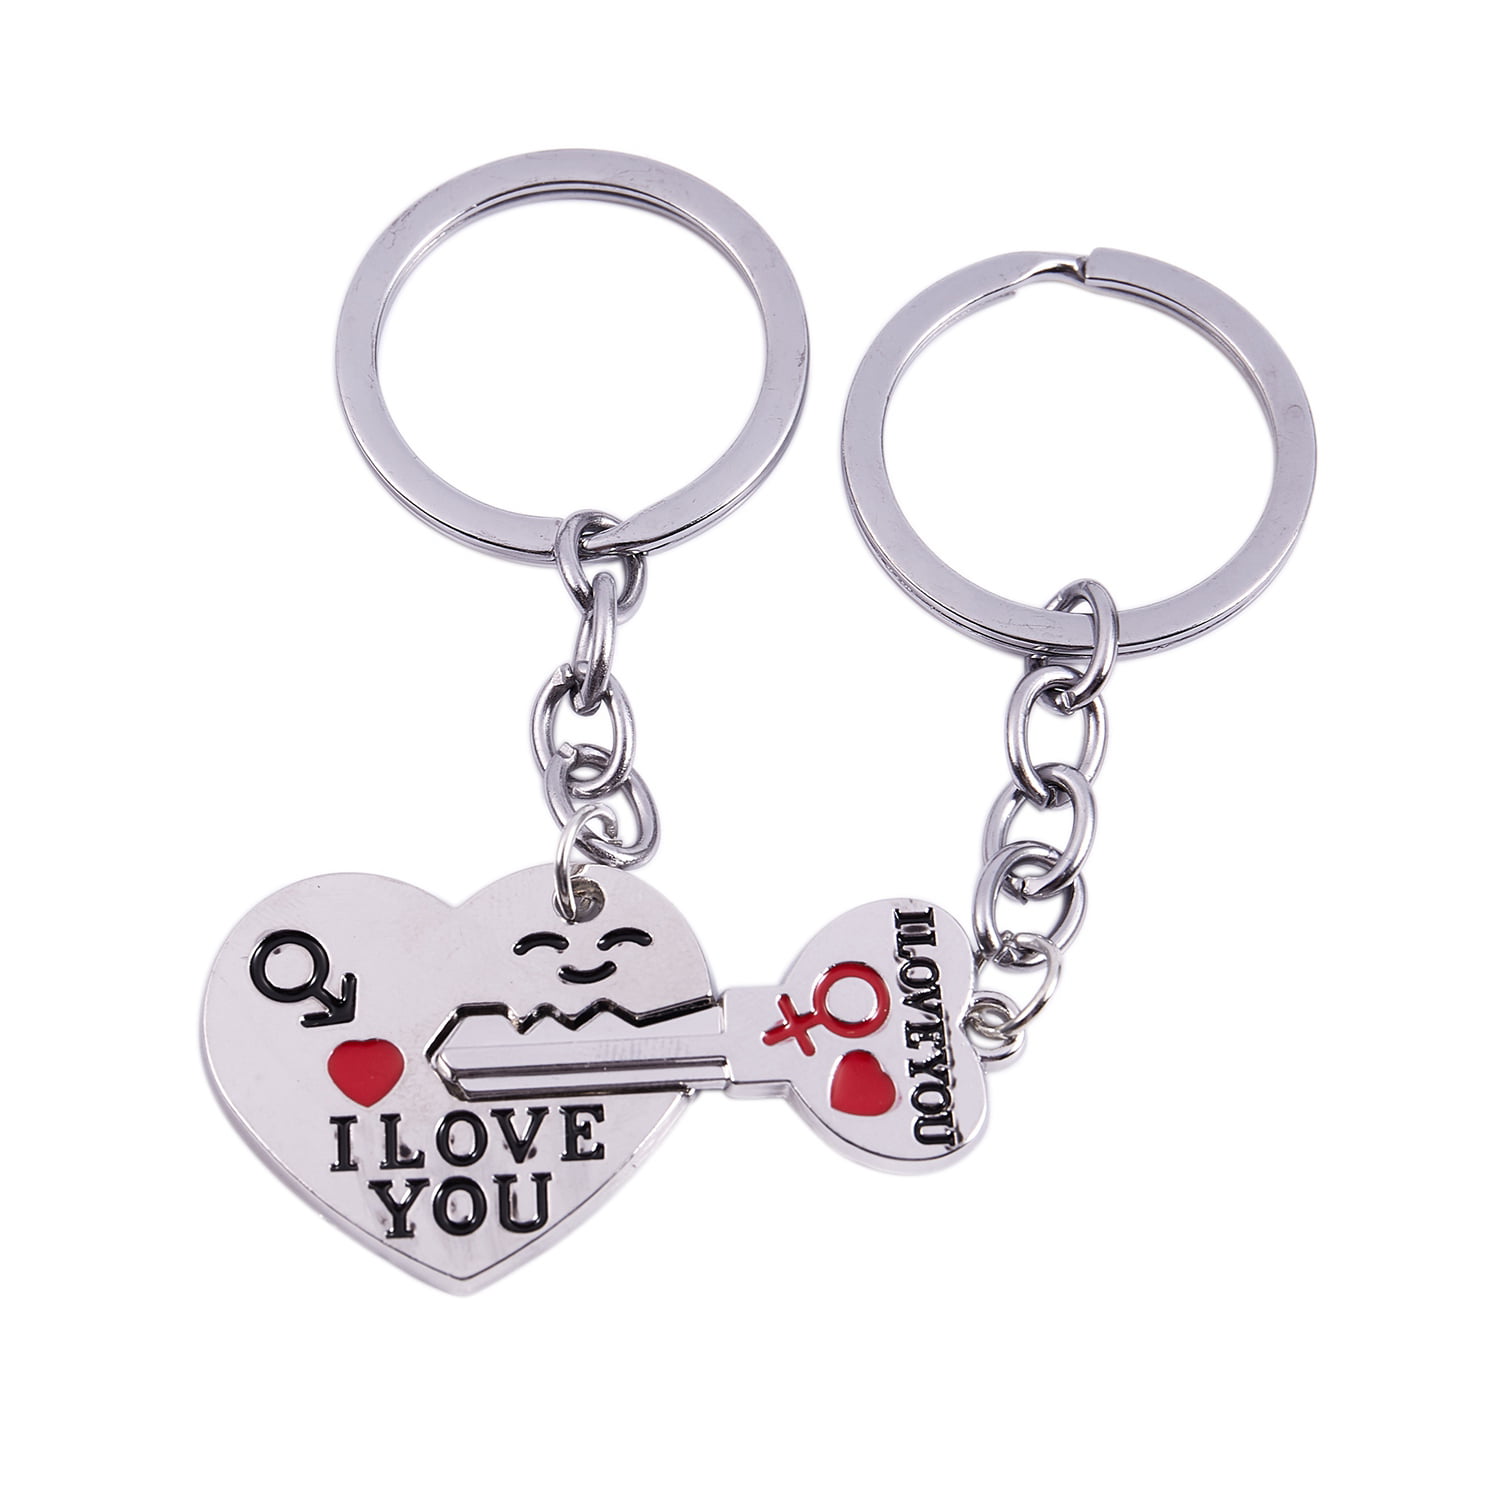 Couples Arrow Heart I LOVE YOU Keychain Lovers Keyring Valentine's Day Present 